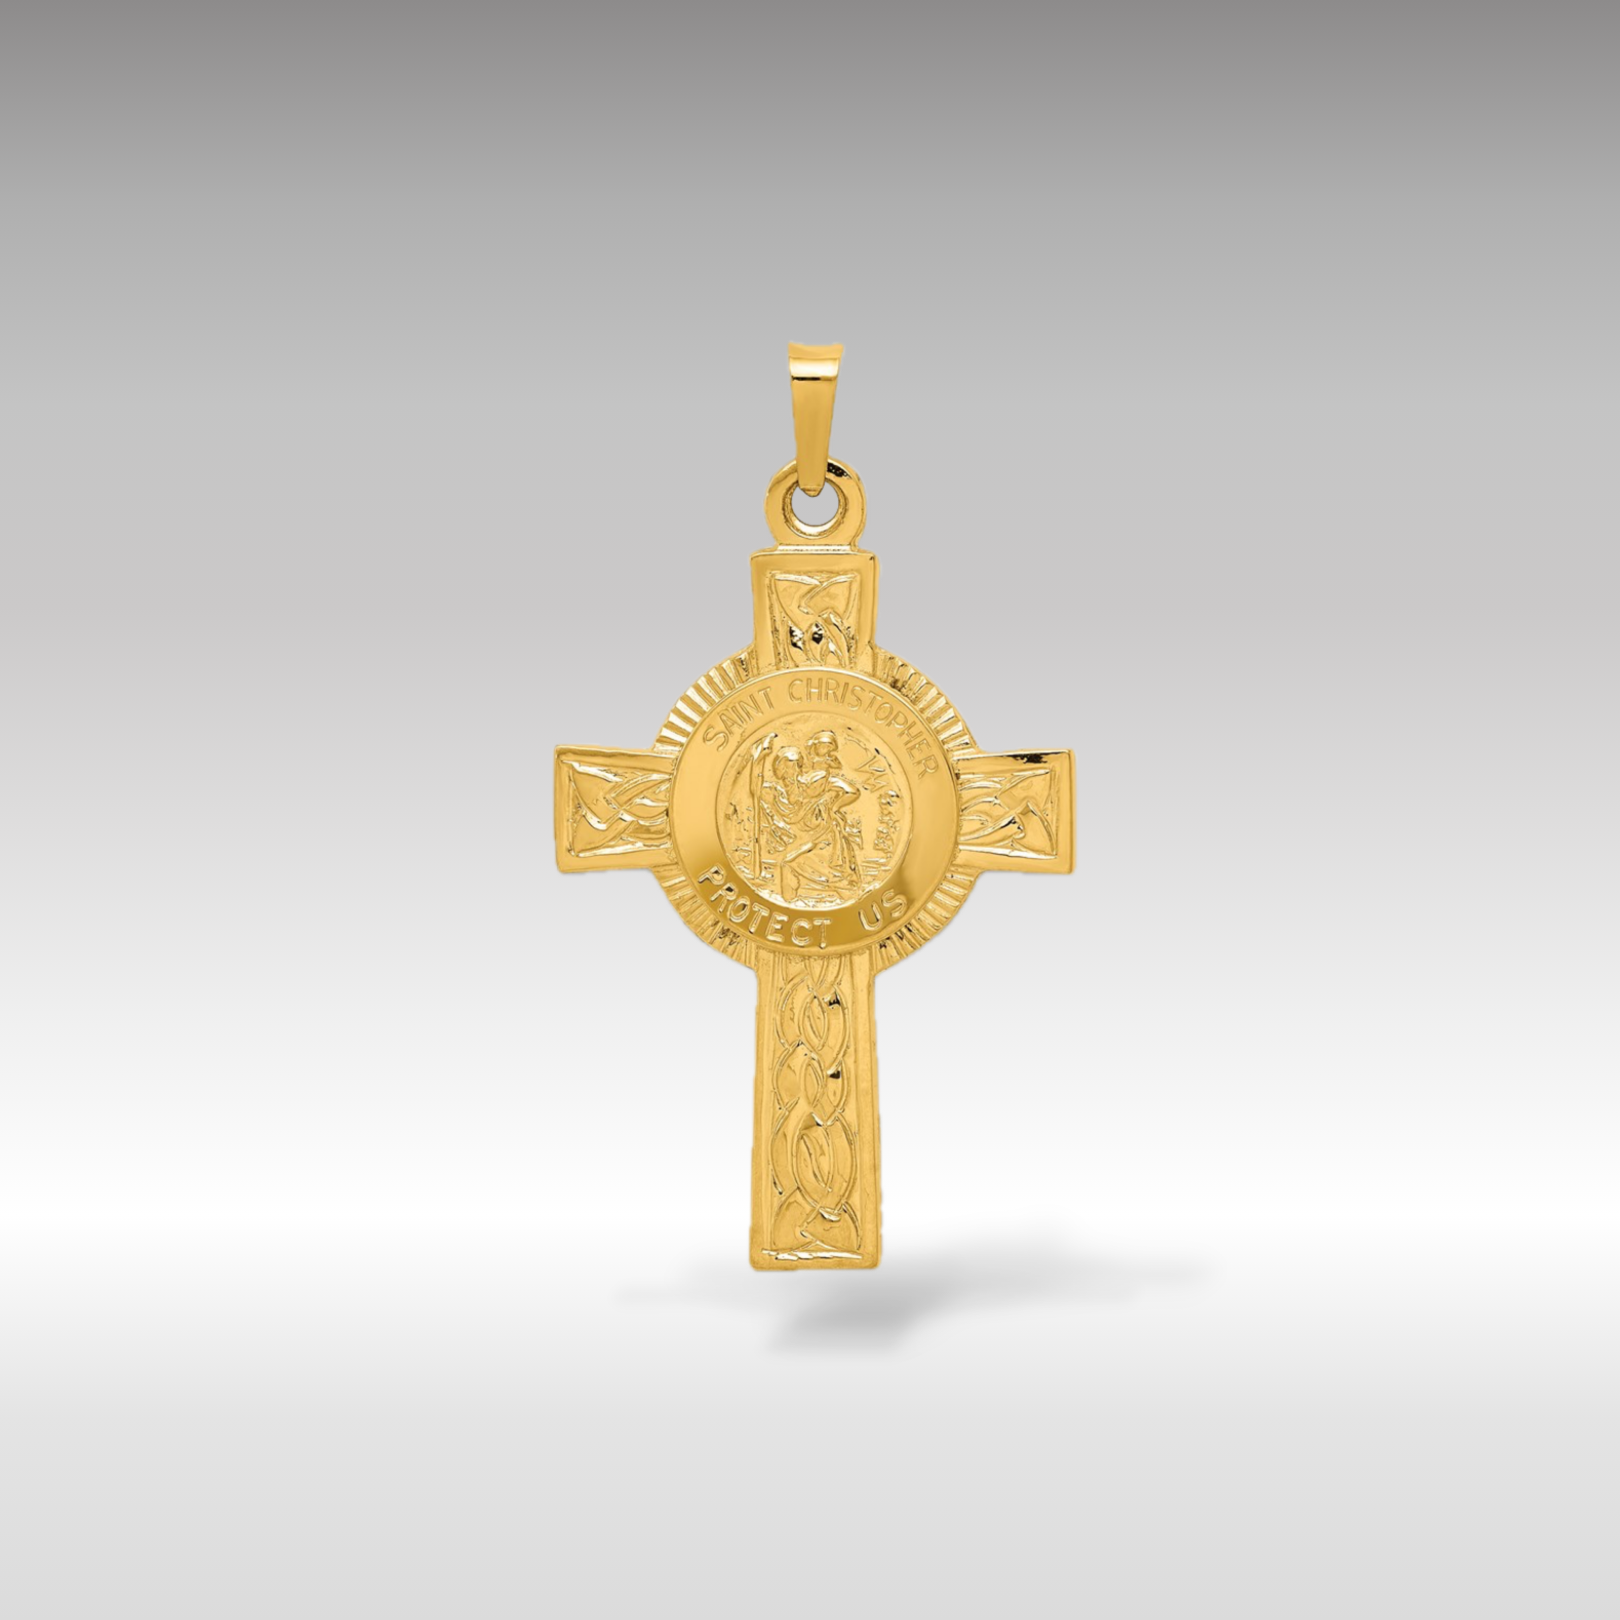 14K Gold Cross Pendant with Saint Christopher Medal - Charlie & Co. Jewelry